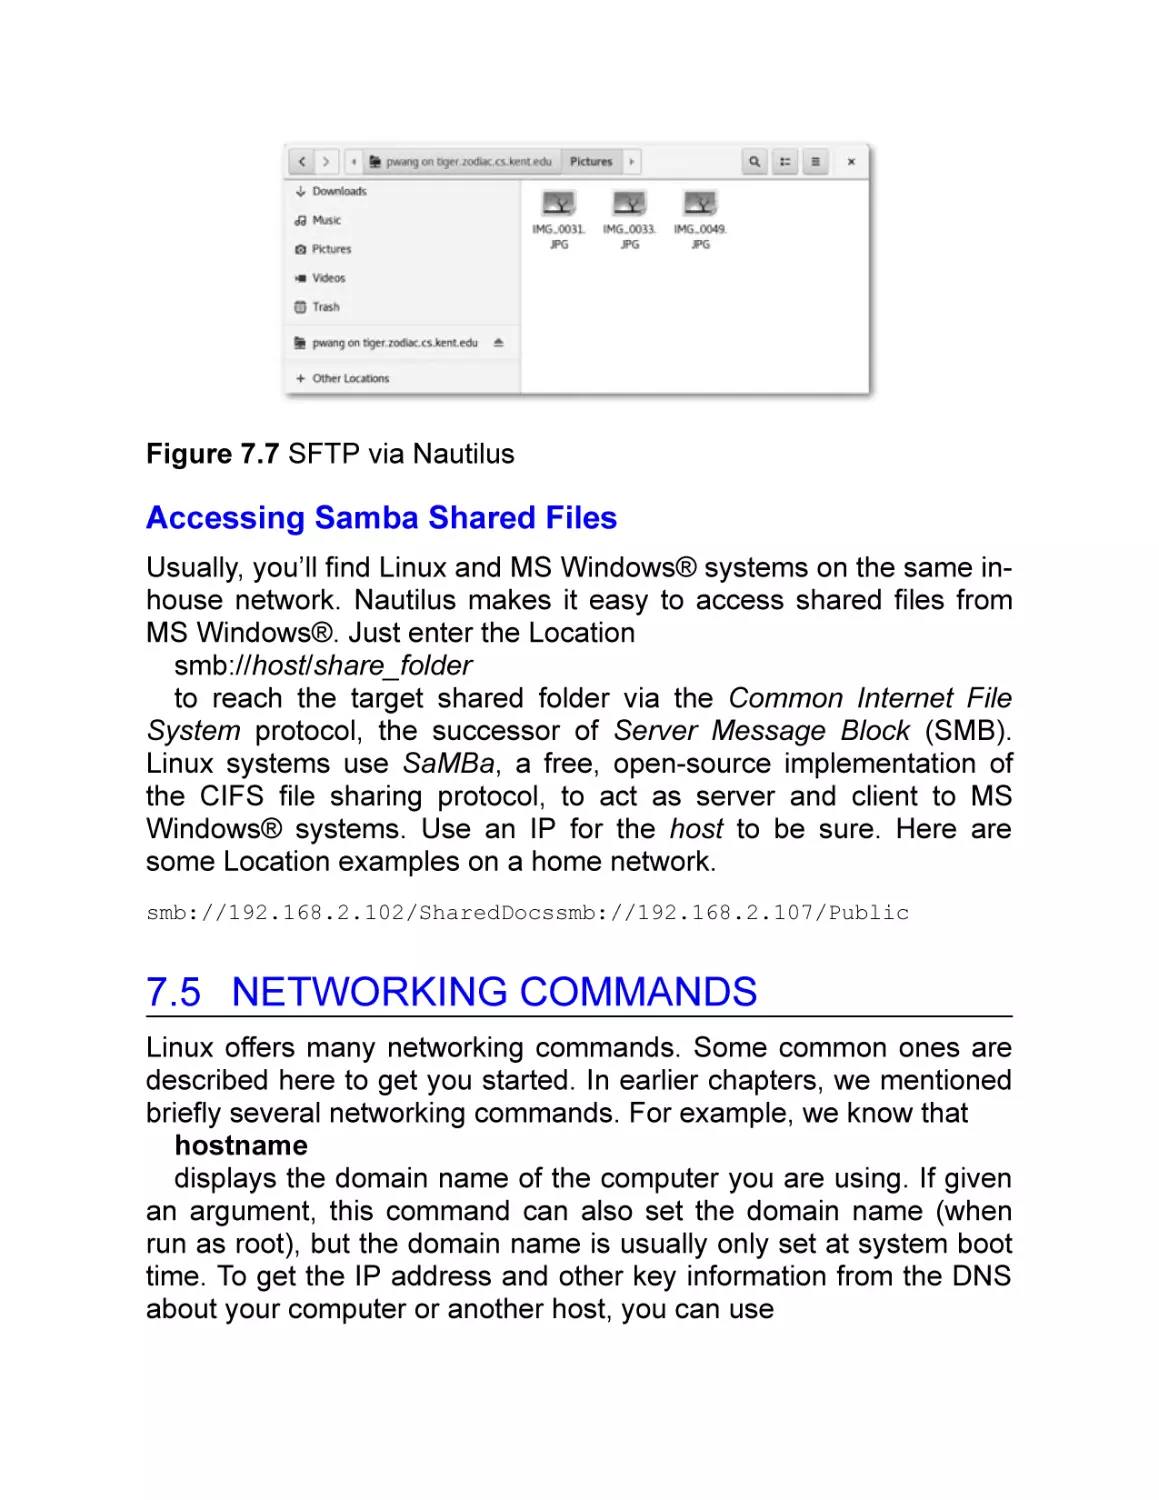 Accessing Samba Shared Files
7.5 Networking Commands